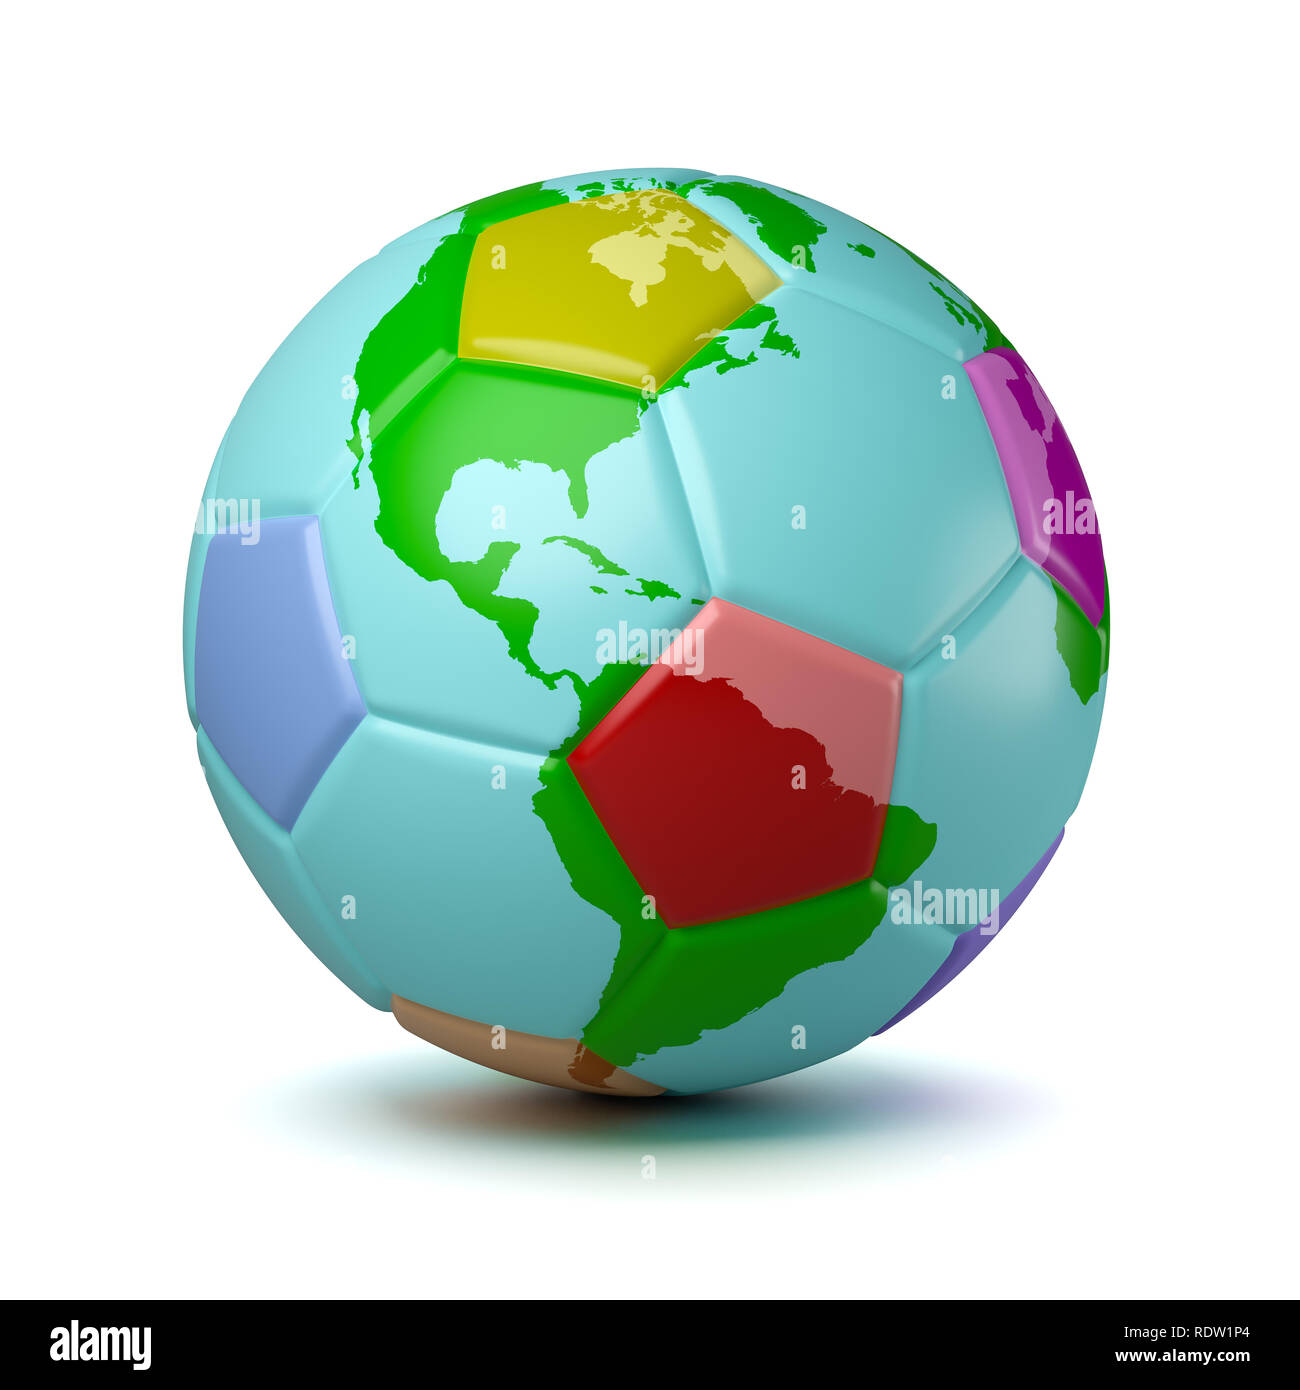 Colorful Soccerball with World Map 3D Illustration on White Background Stock Photo